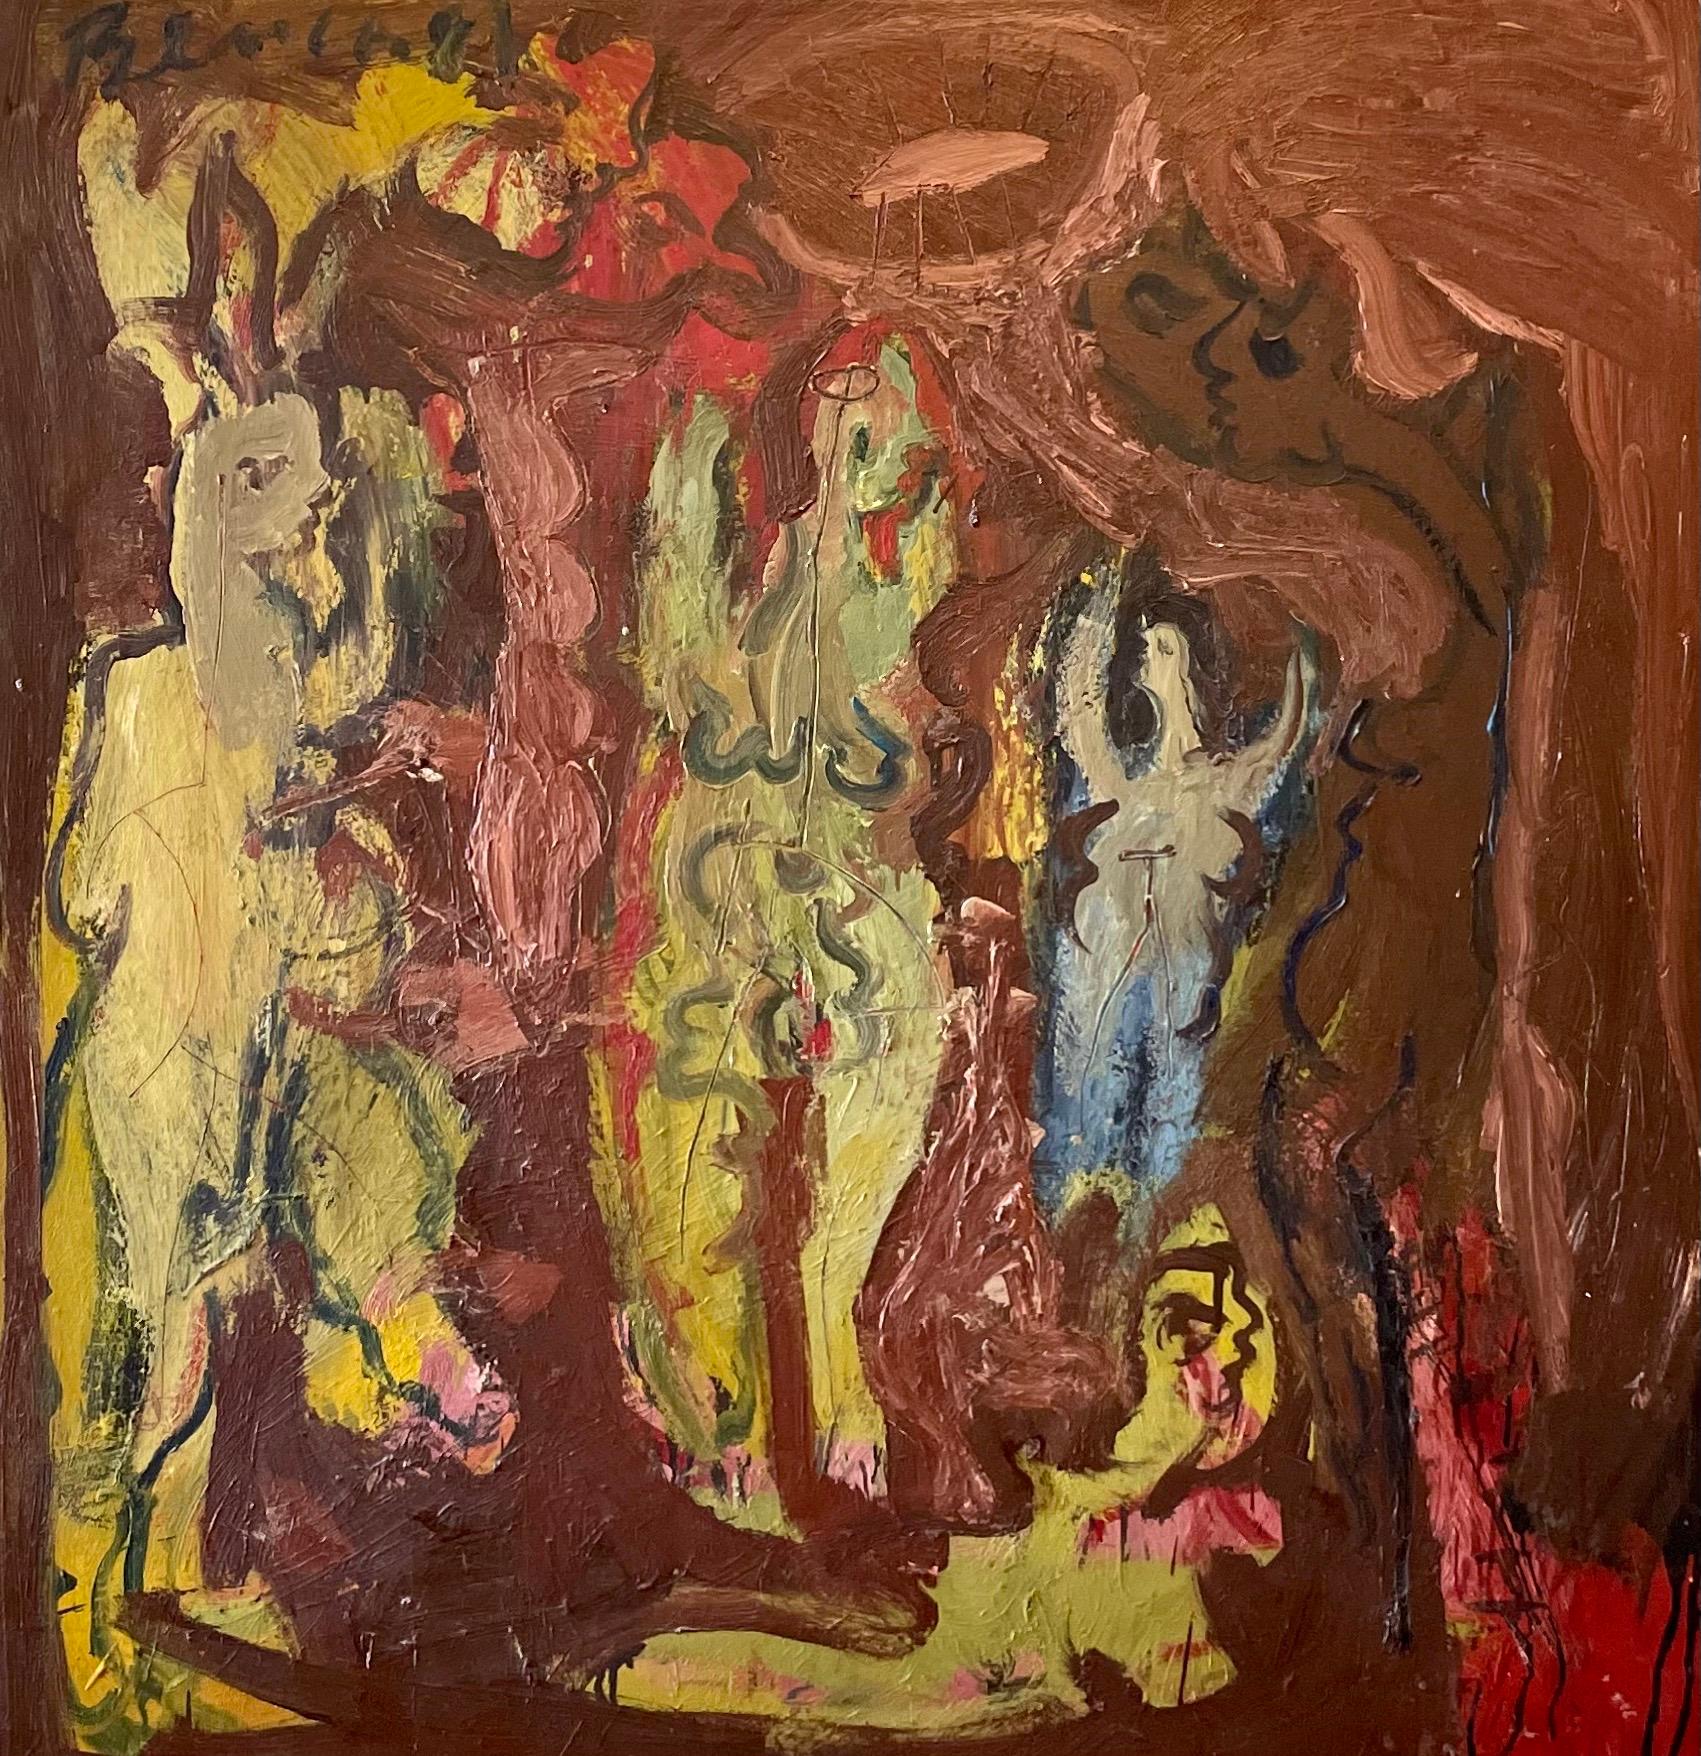 Abstract oil painting on stretched canvas featuring figures against a dark brown background. Signed upper left. 

Adolf Benca was born in Bratislava, Slovakia in 1959. He immigrated to the United States in 1969 and he studied at the Cooper Union for